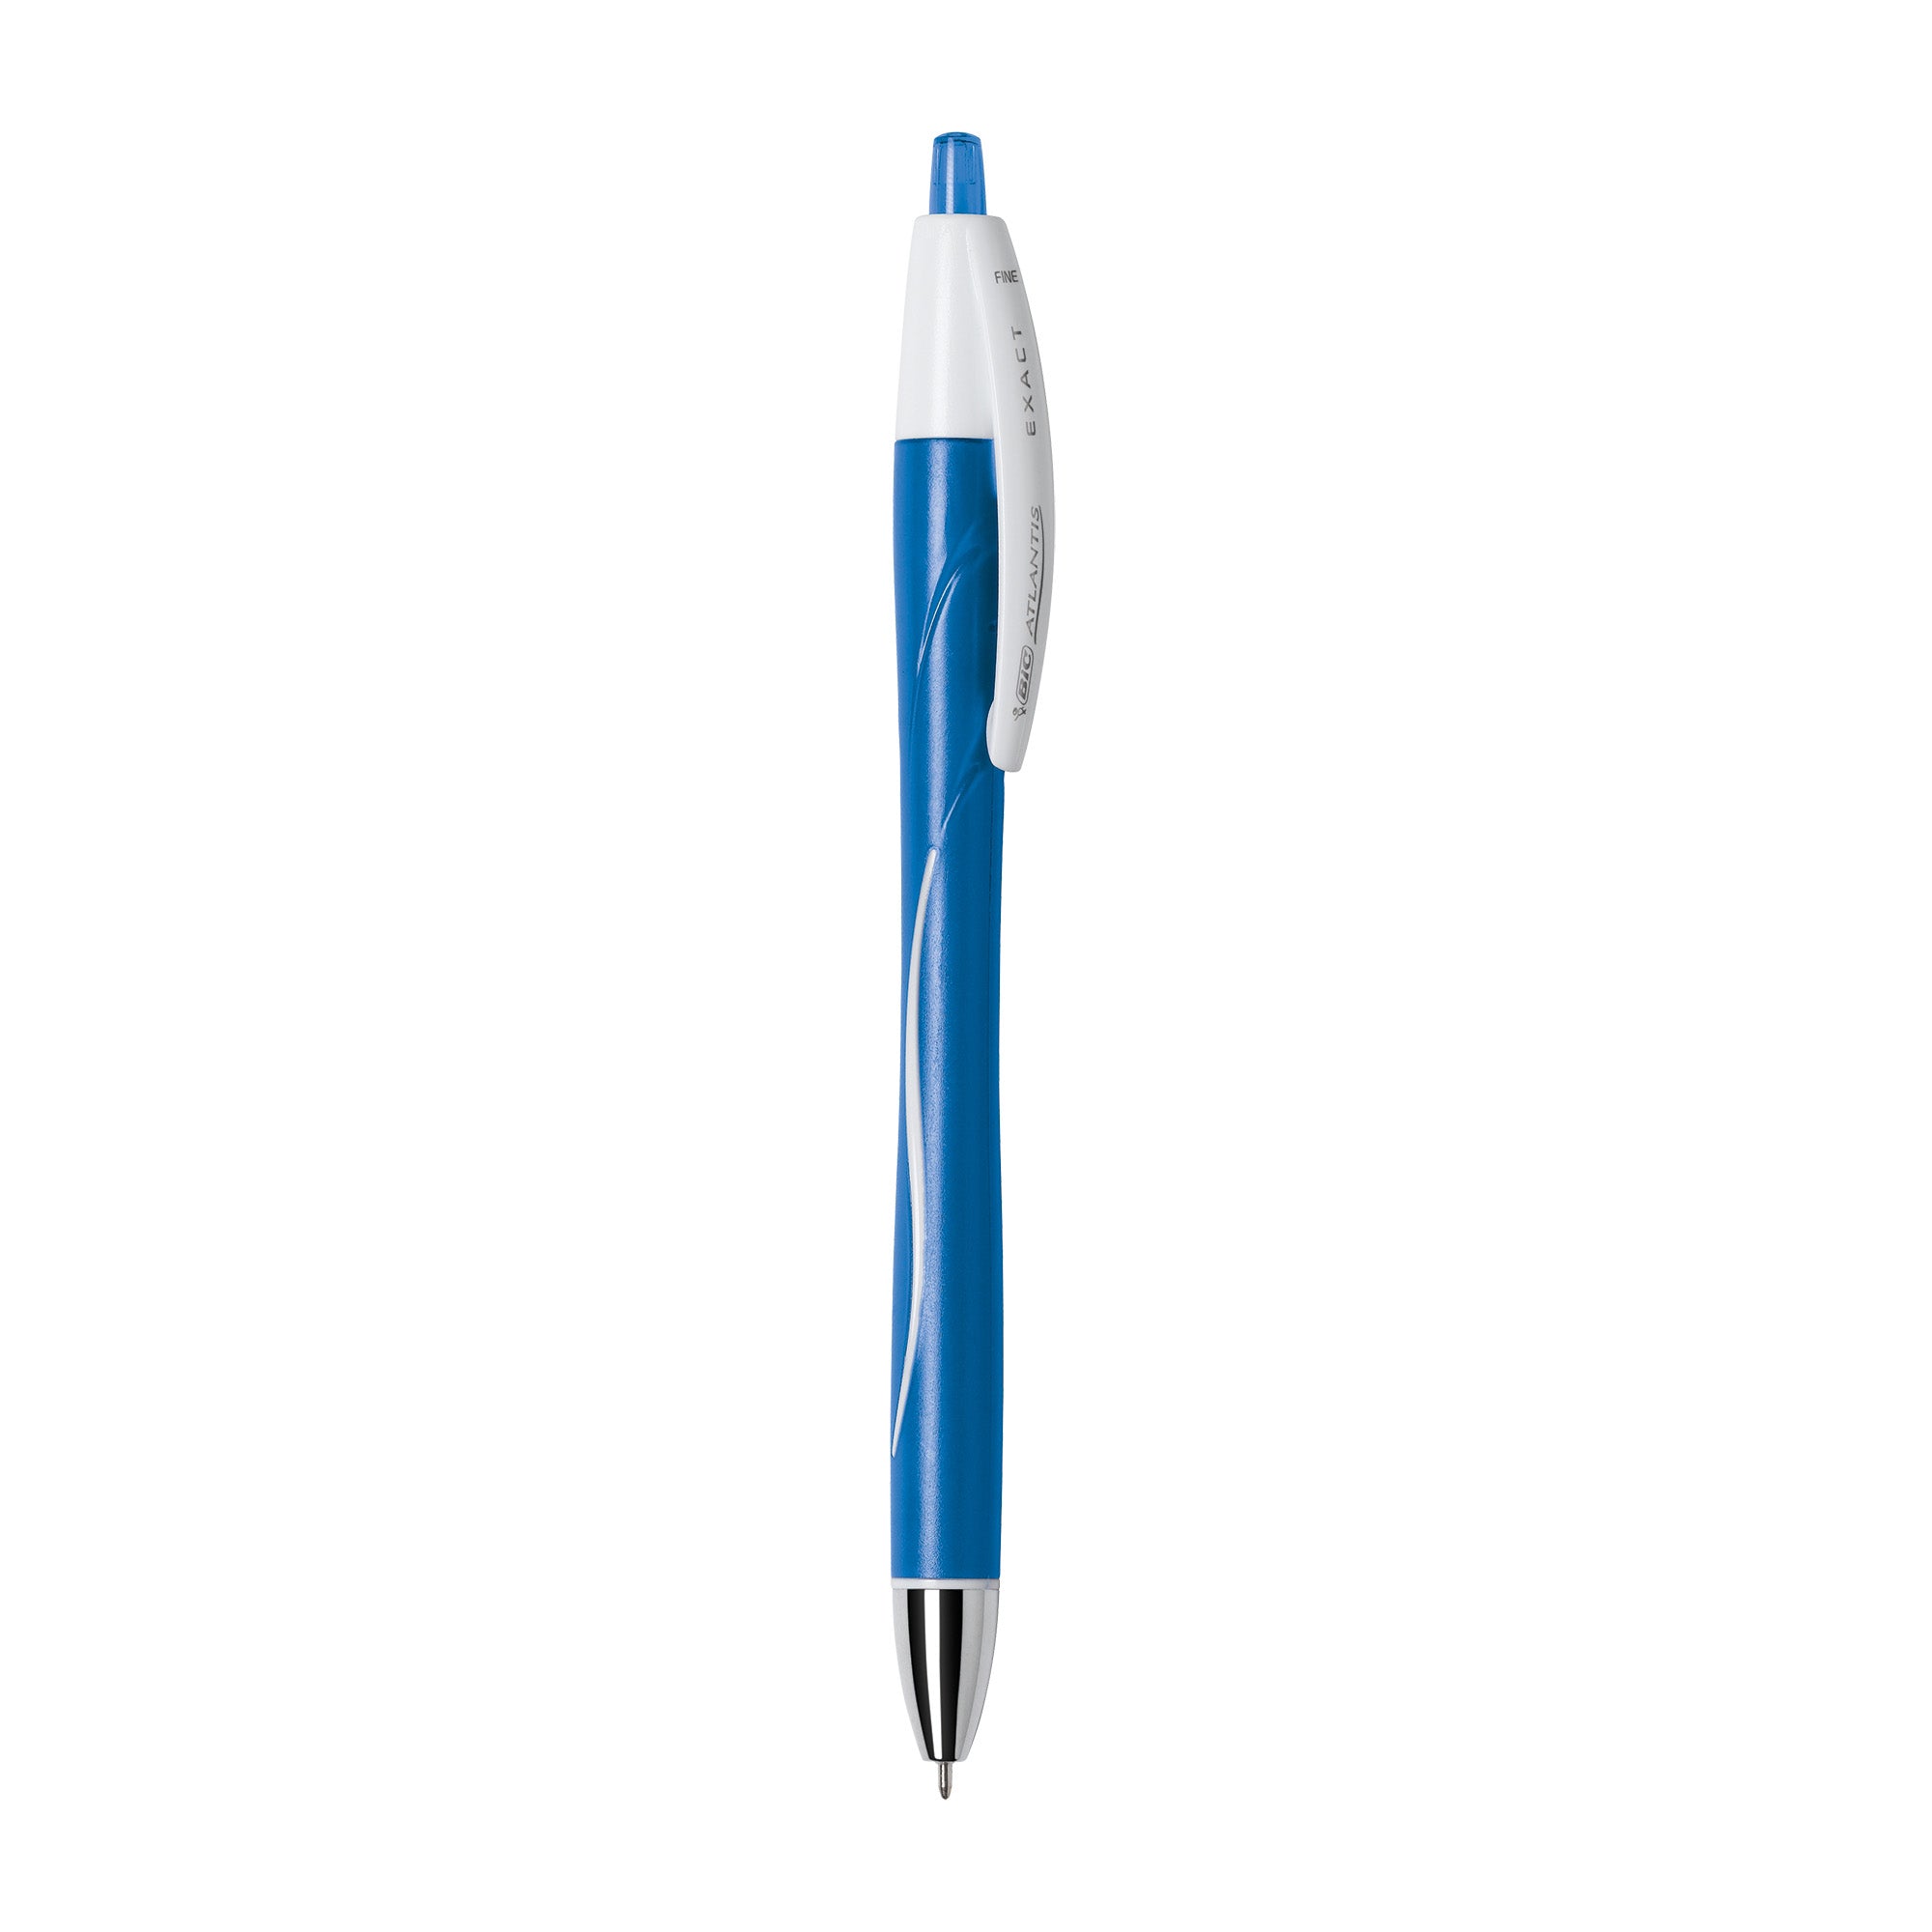 Glide™ Exact Retractable Ball Point Pen, Fine Point (0.7 mm), Blue, 12-Count